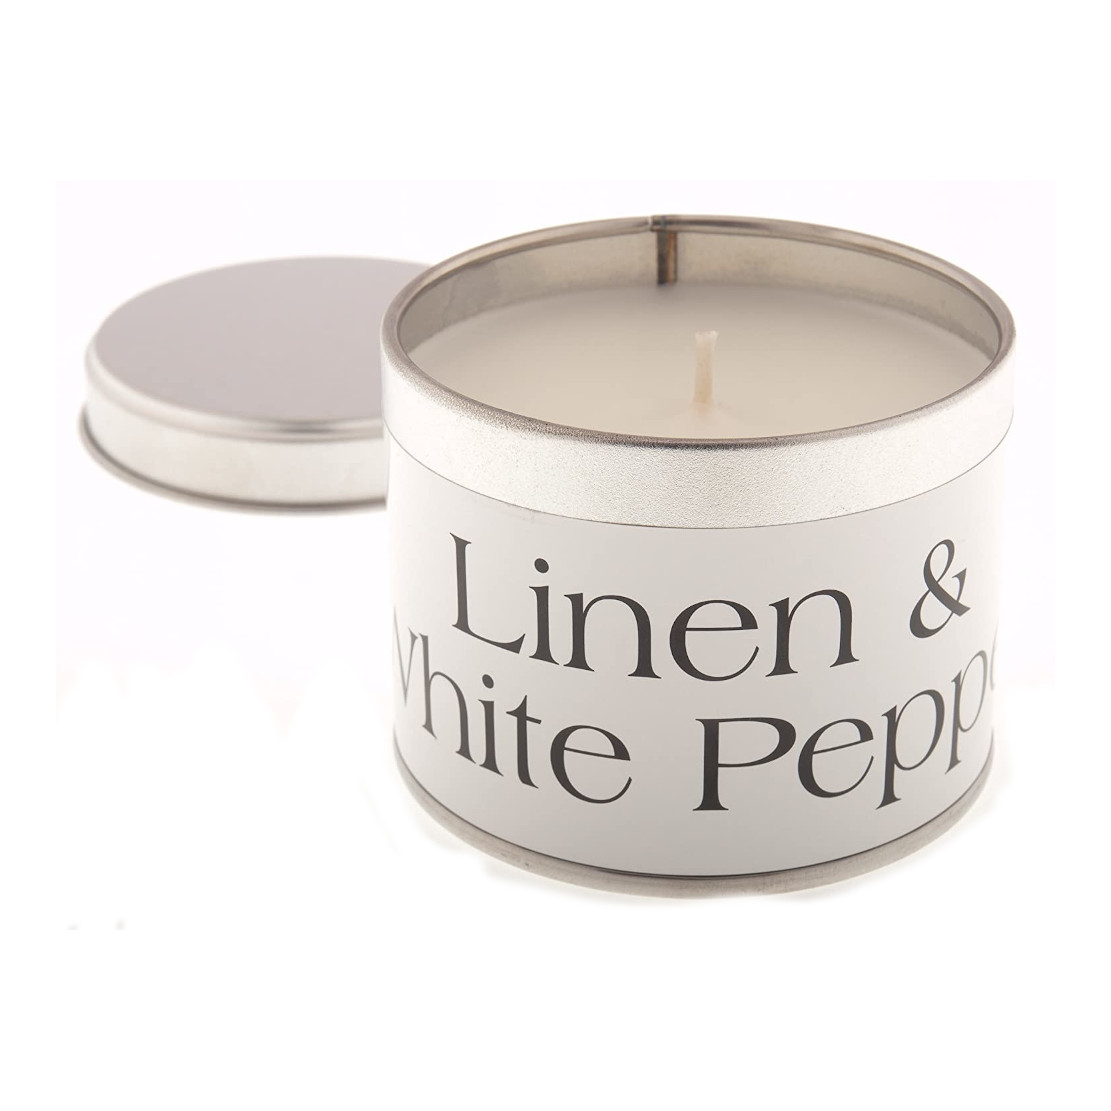 Pintail Linen & White Pepper Coordinate Tin Candle